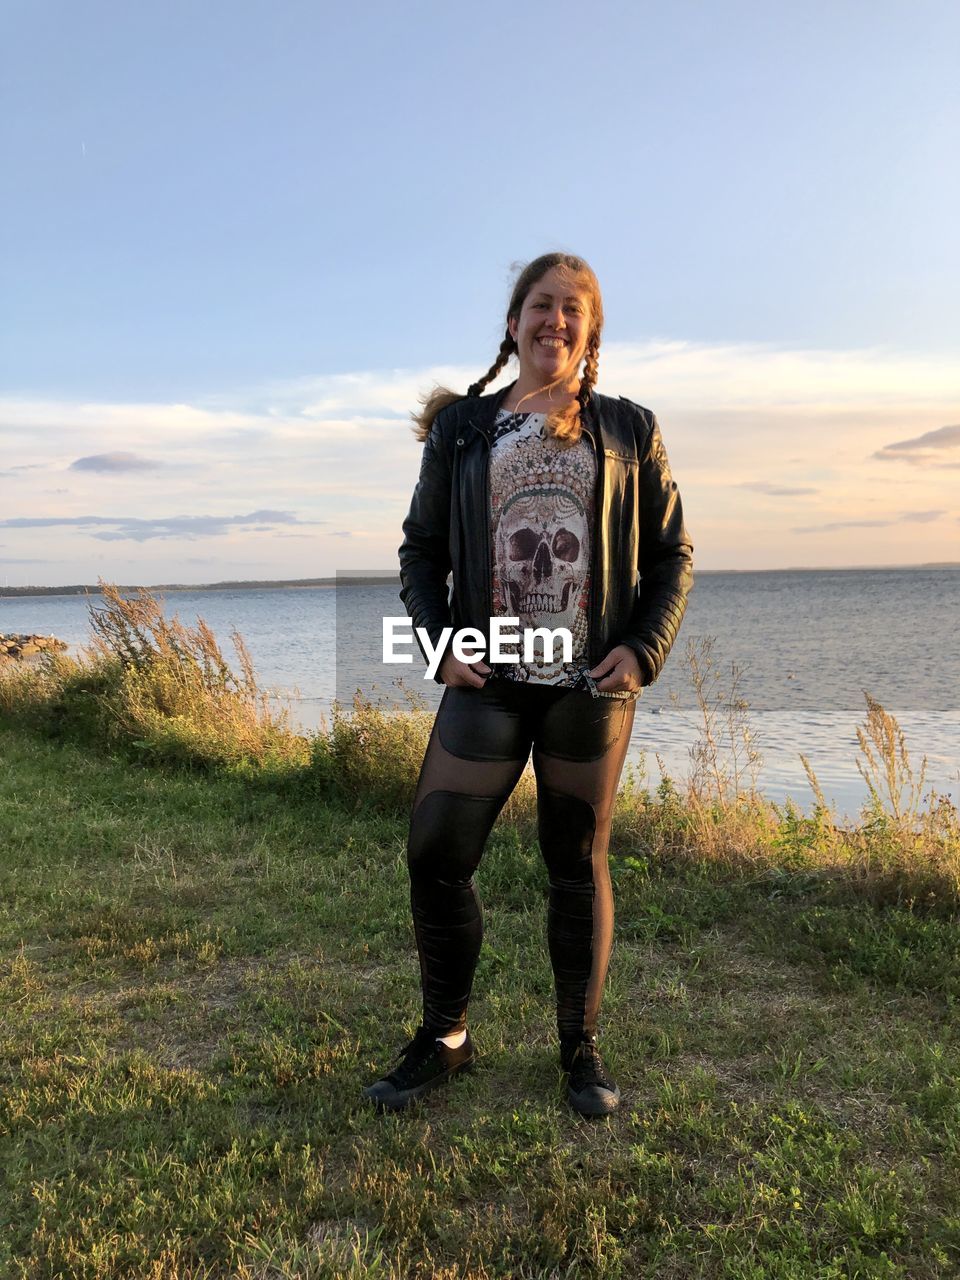 sky, one person, sea, full length, land, water, nature, standing, beach, front view, adult, portrait, beauty in nature, grass, leisure activity, casual clothing, smiling, looking at camera, young adult, women, day, lifestyles, scenics - nature, cloud, plant, horizon, clothing, horizon over water, outdoors, holiday, happiness, emotion, sunlight, trip, vacation, copy space, tranquility, travel, coast, landscape